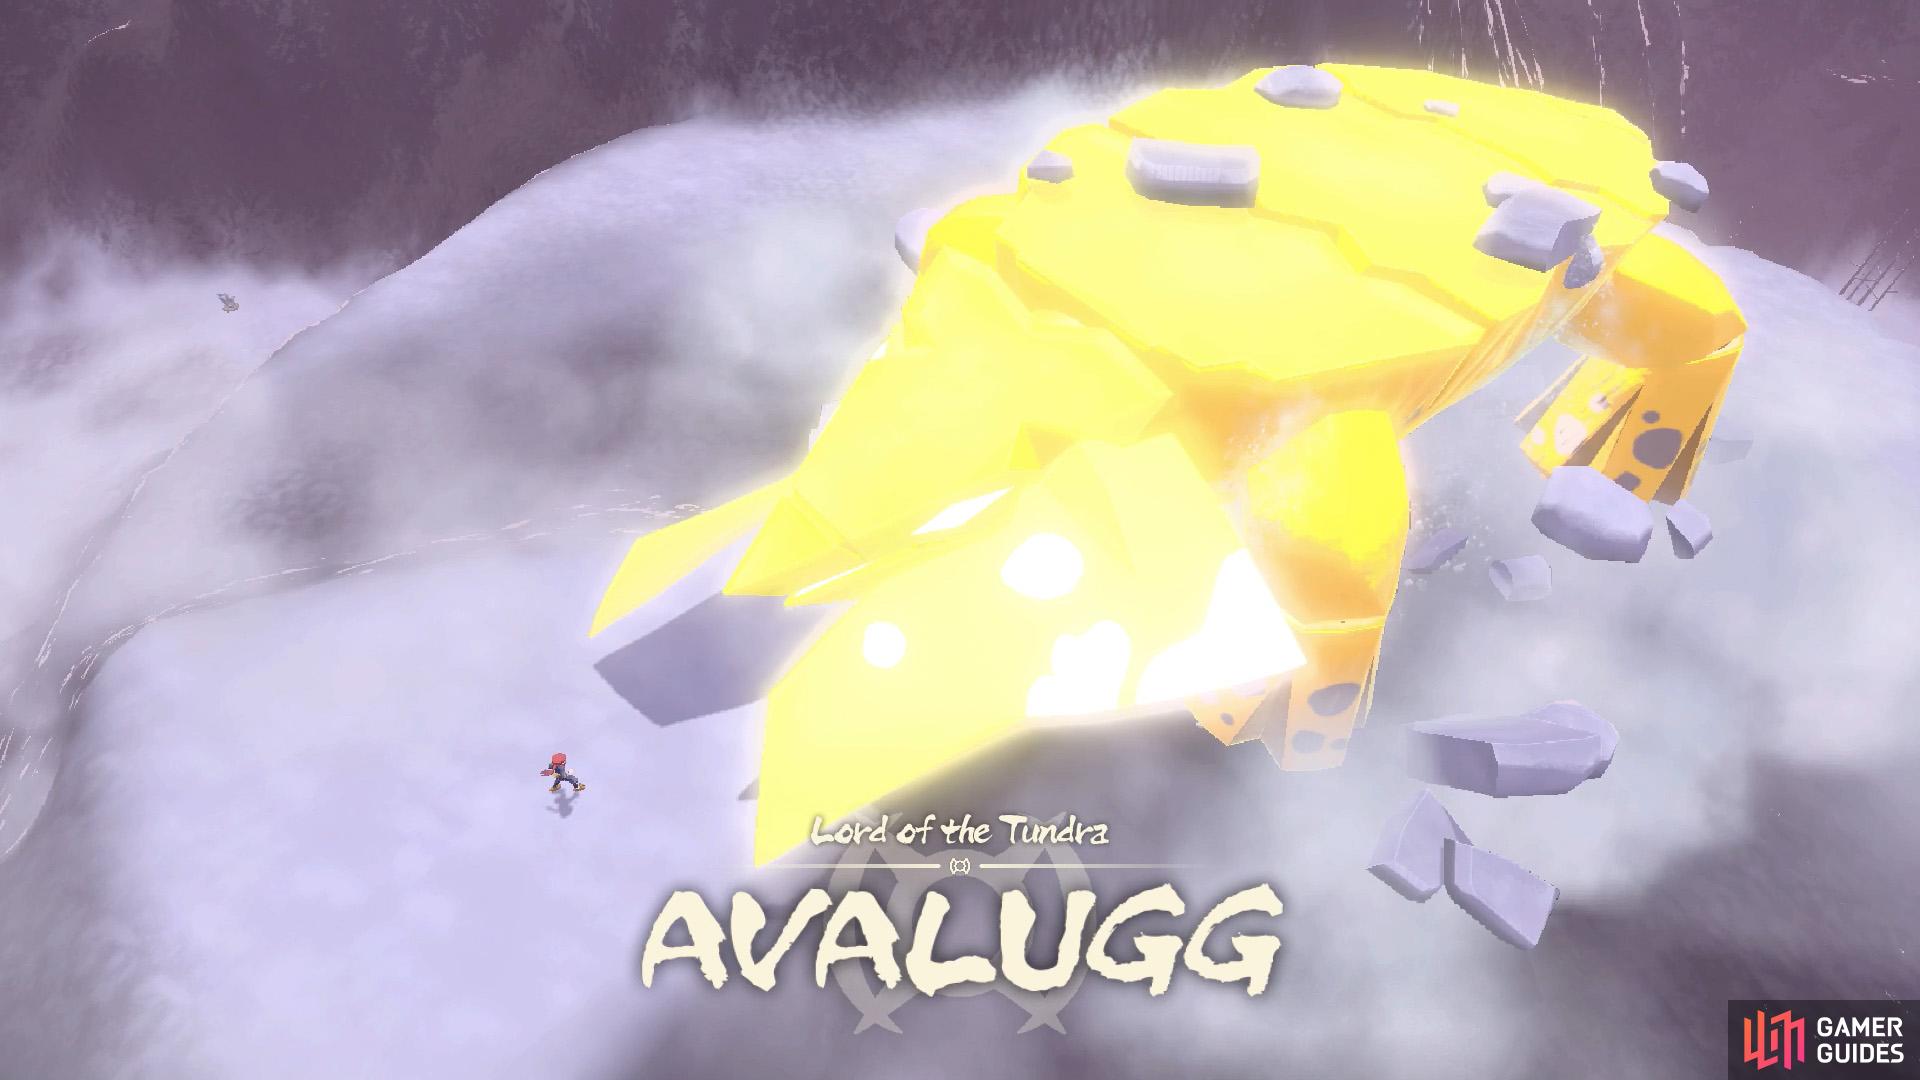 Avalugg: Lord of the Tundra.